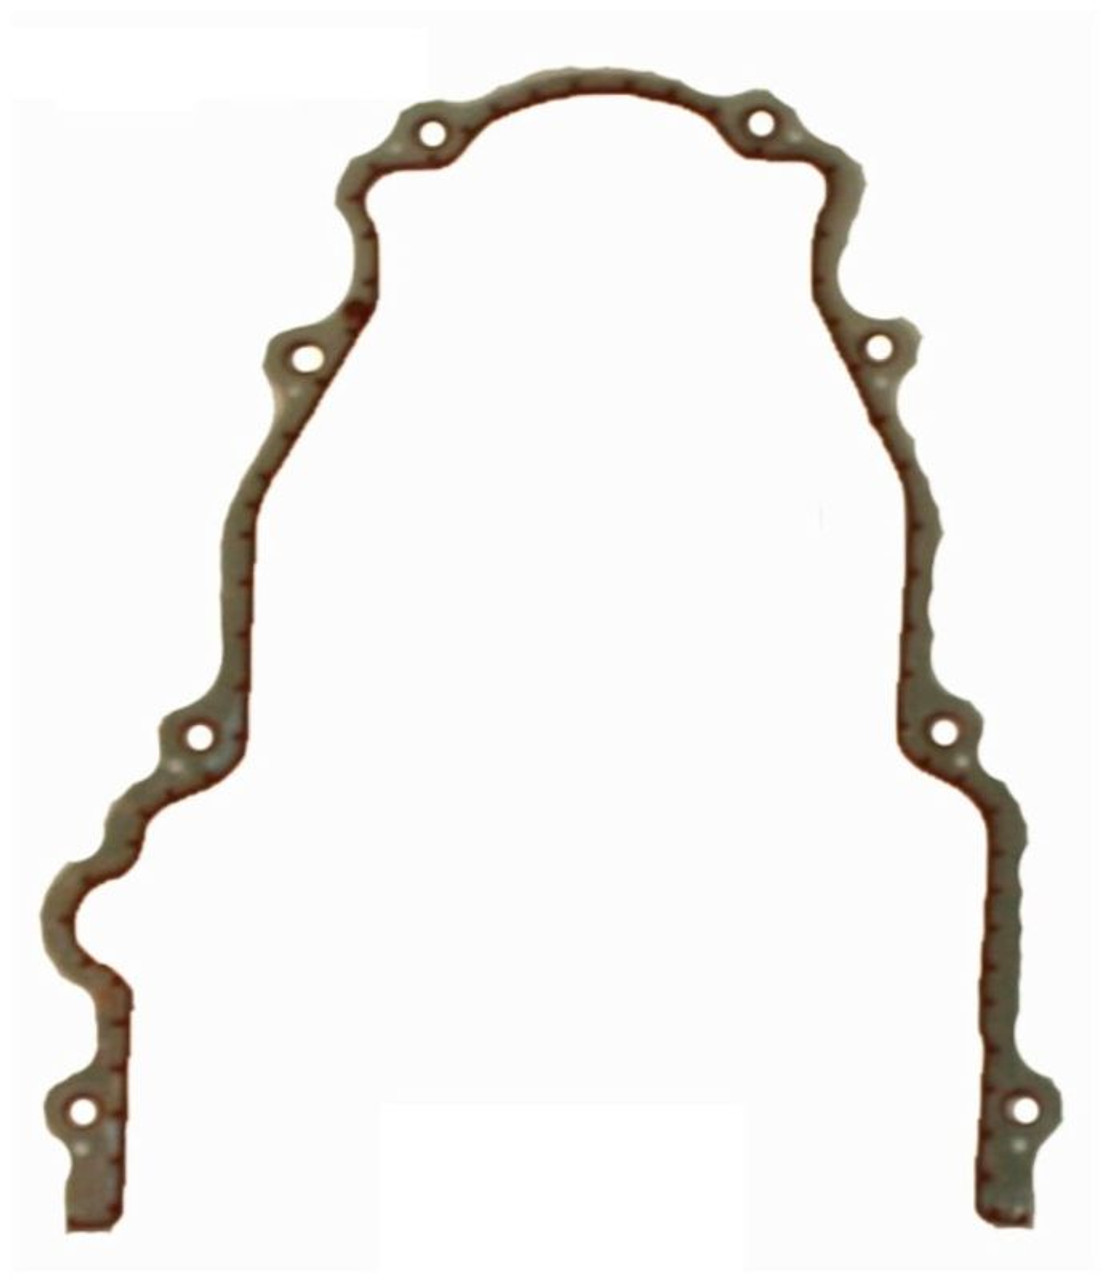 2007 Chevrolet Express 2500 4.8L Engine Timing Cover Gasket TCG293-A -391